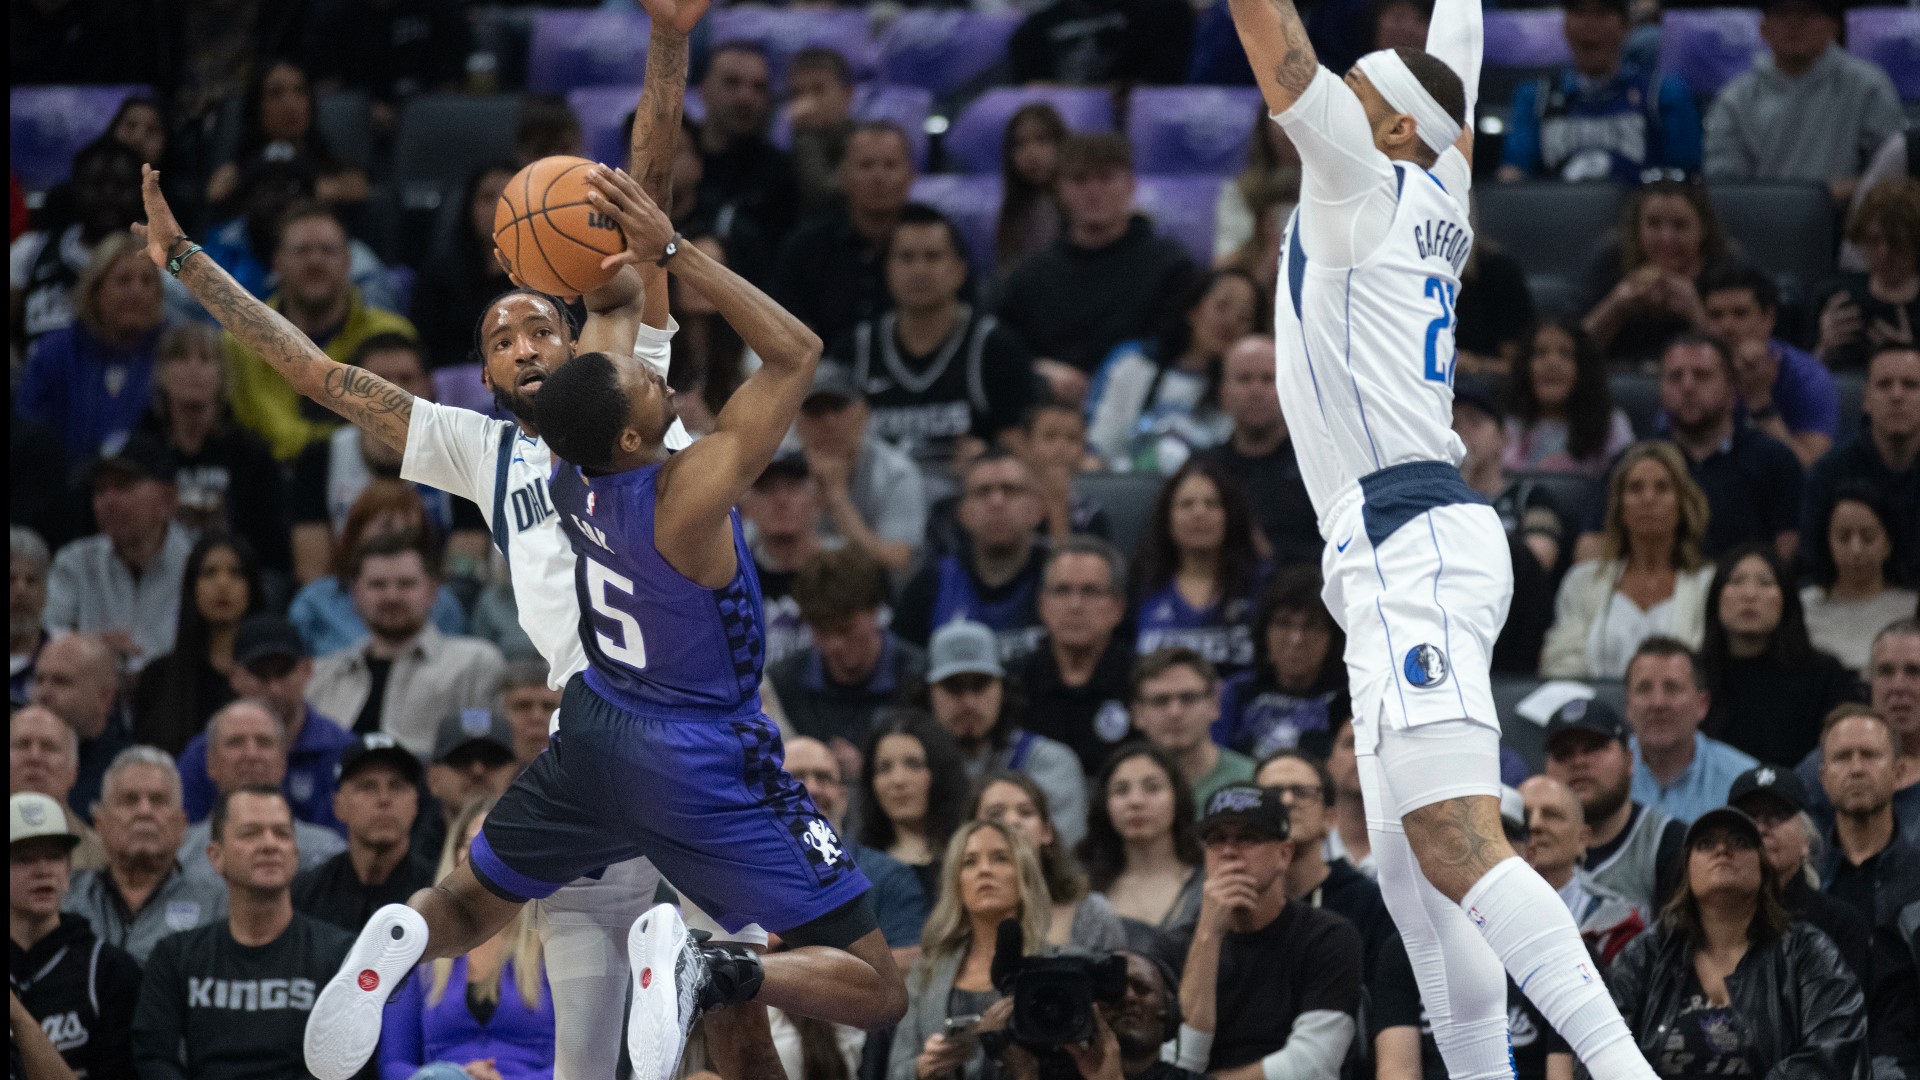 Luka Doncic scored 26 of his 28 points in the first half and the Dallas Mavericks beat the Sacramento Kings 132-96 on Tuesday night for their fifth straight win.